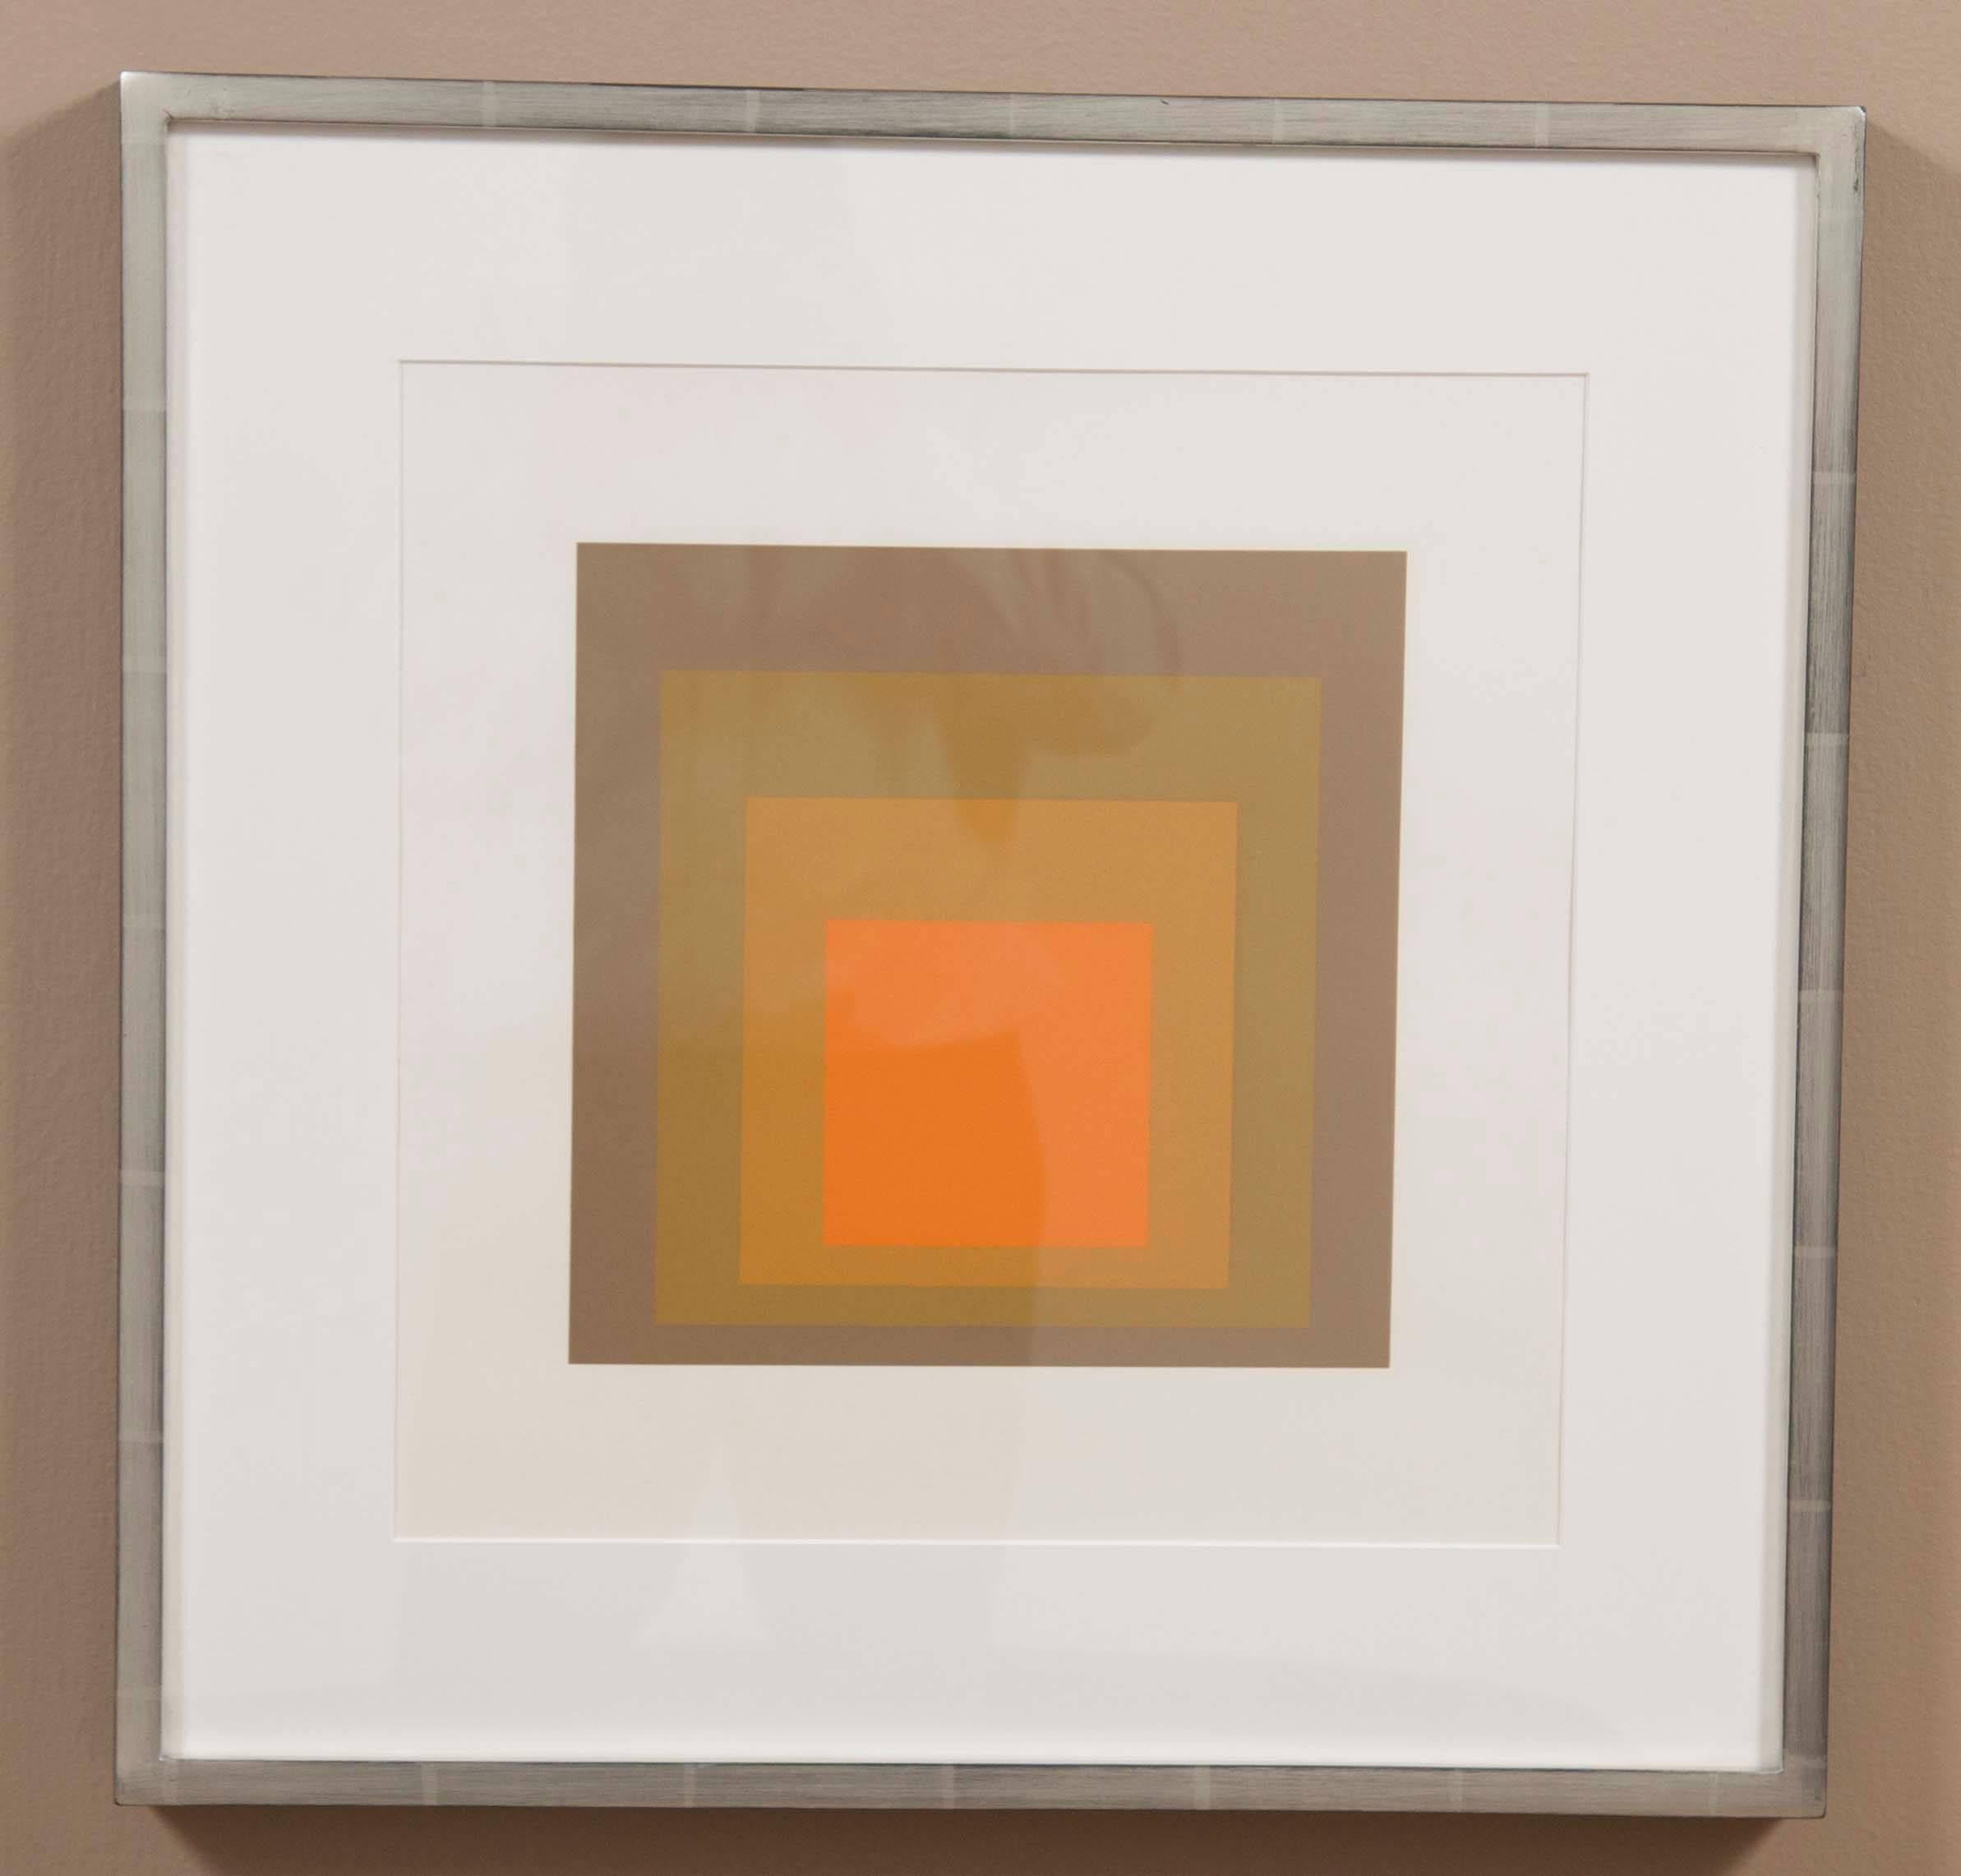 Josef Albers homage to the square from formations: Articulation 1972. Silkscreen prints floated in 12 karat white gold gilt frame using all acid free archival materials. From Portfolio #176 of 1000 printed.
Printed by Sirocco screen printing, New